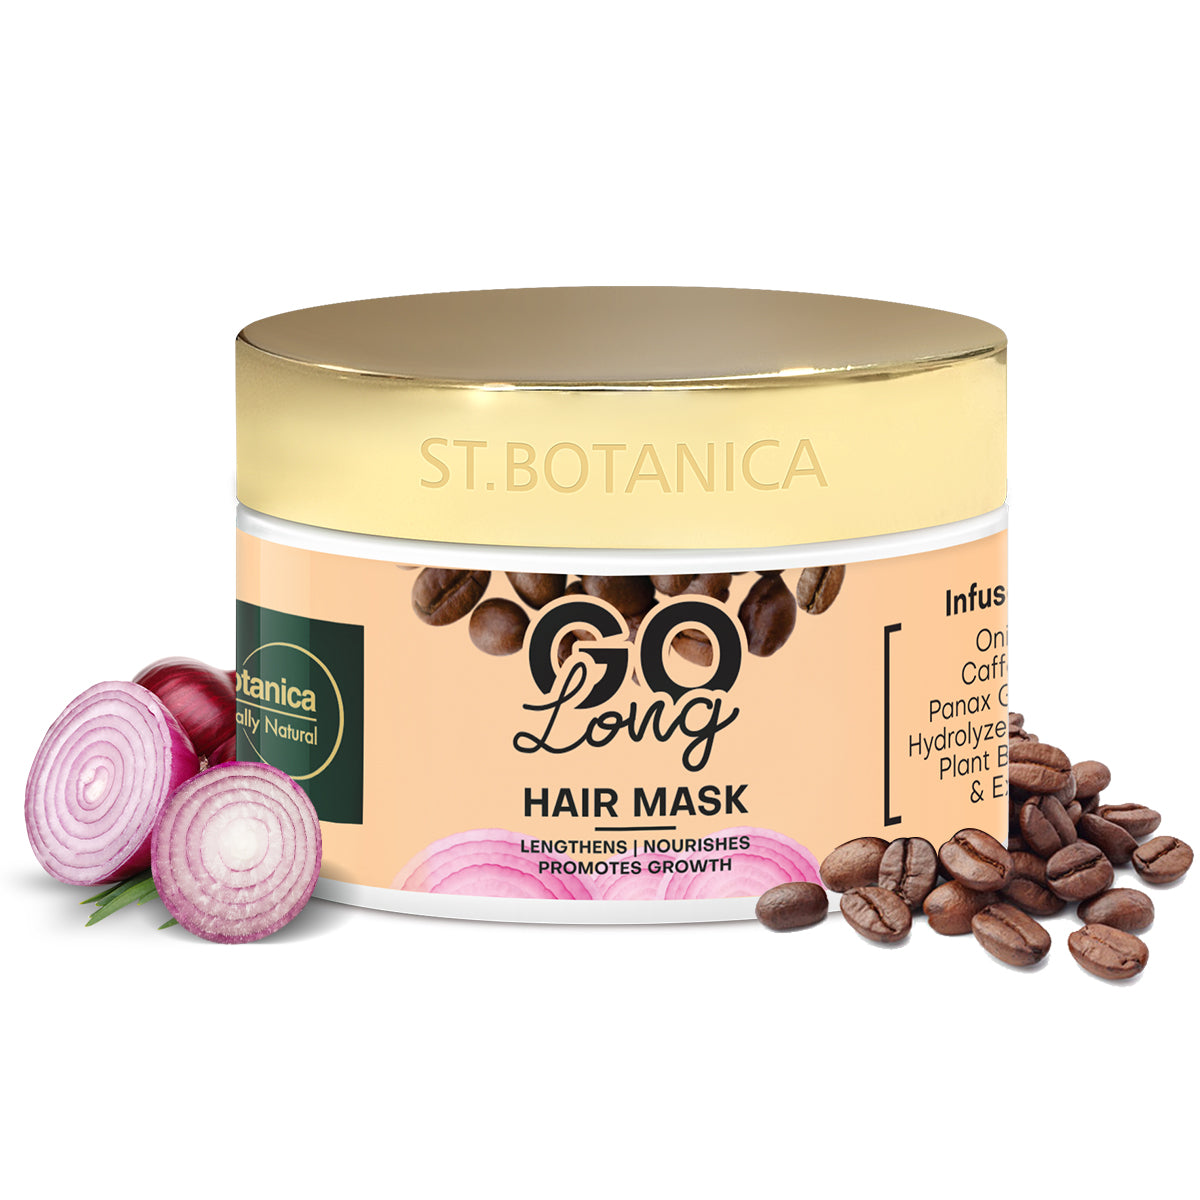 St.Botanica GO Long Onion Hair Mask - Infused With Onion Oil, Caffeine 1%, Hydrolyzed Keratin 2%, No Silicones - 200 g